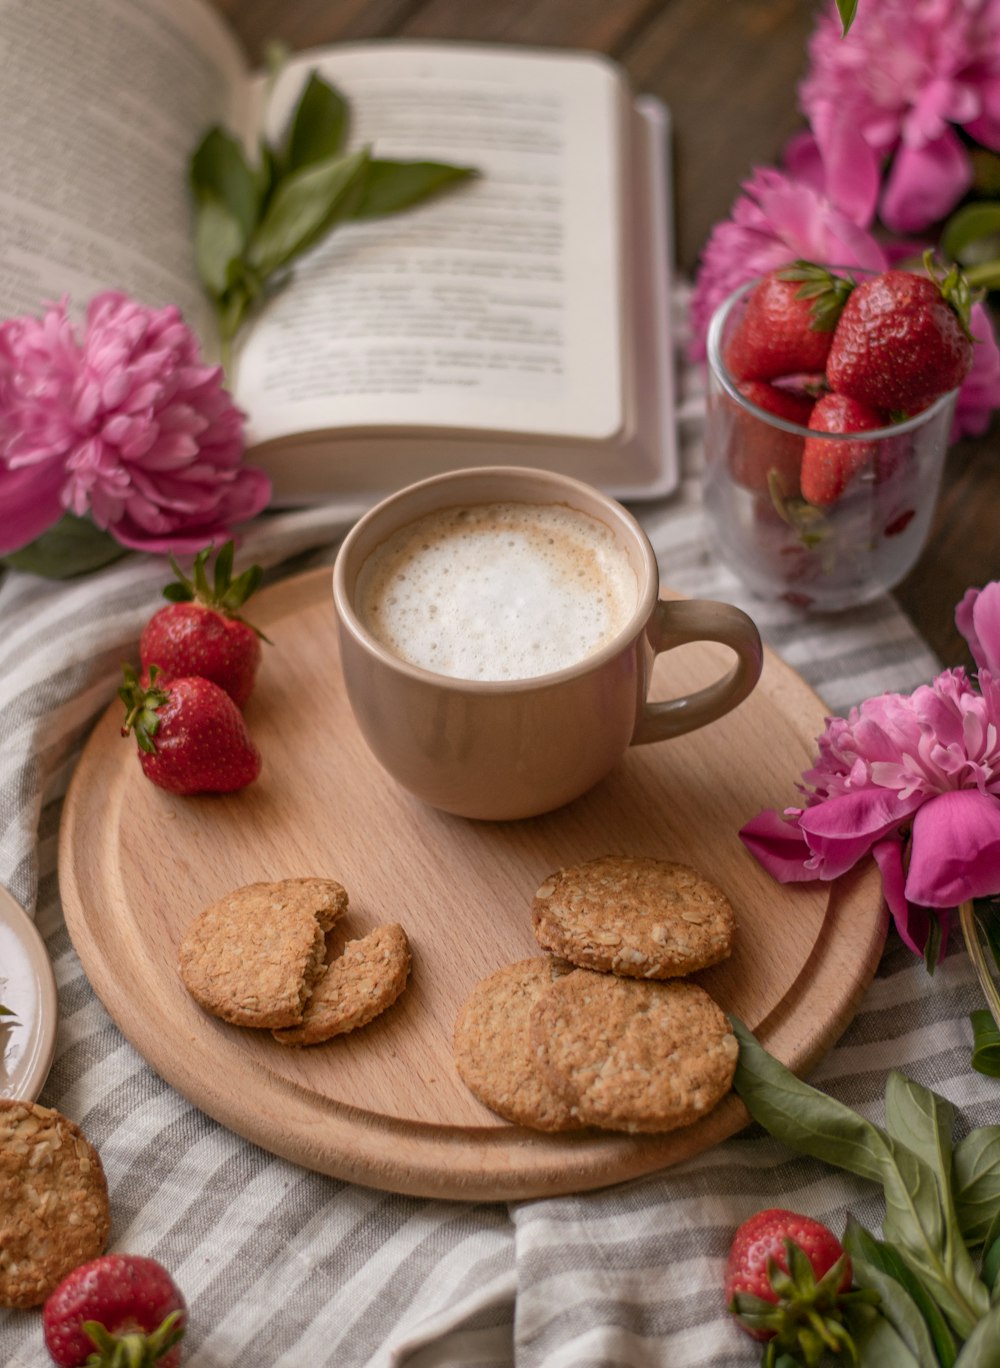 food photography of three baked biscuits near white ceramic mug with coffee